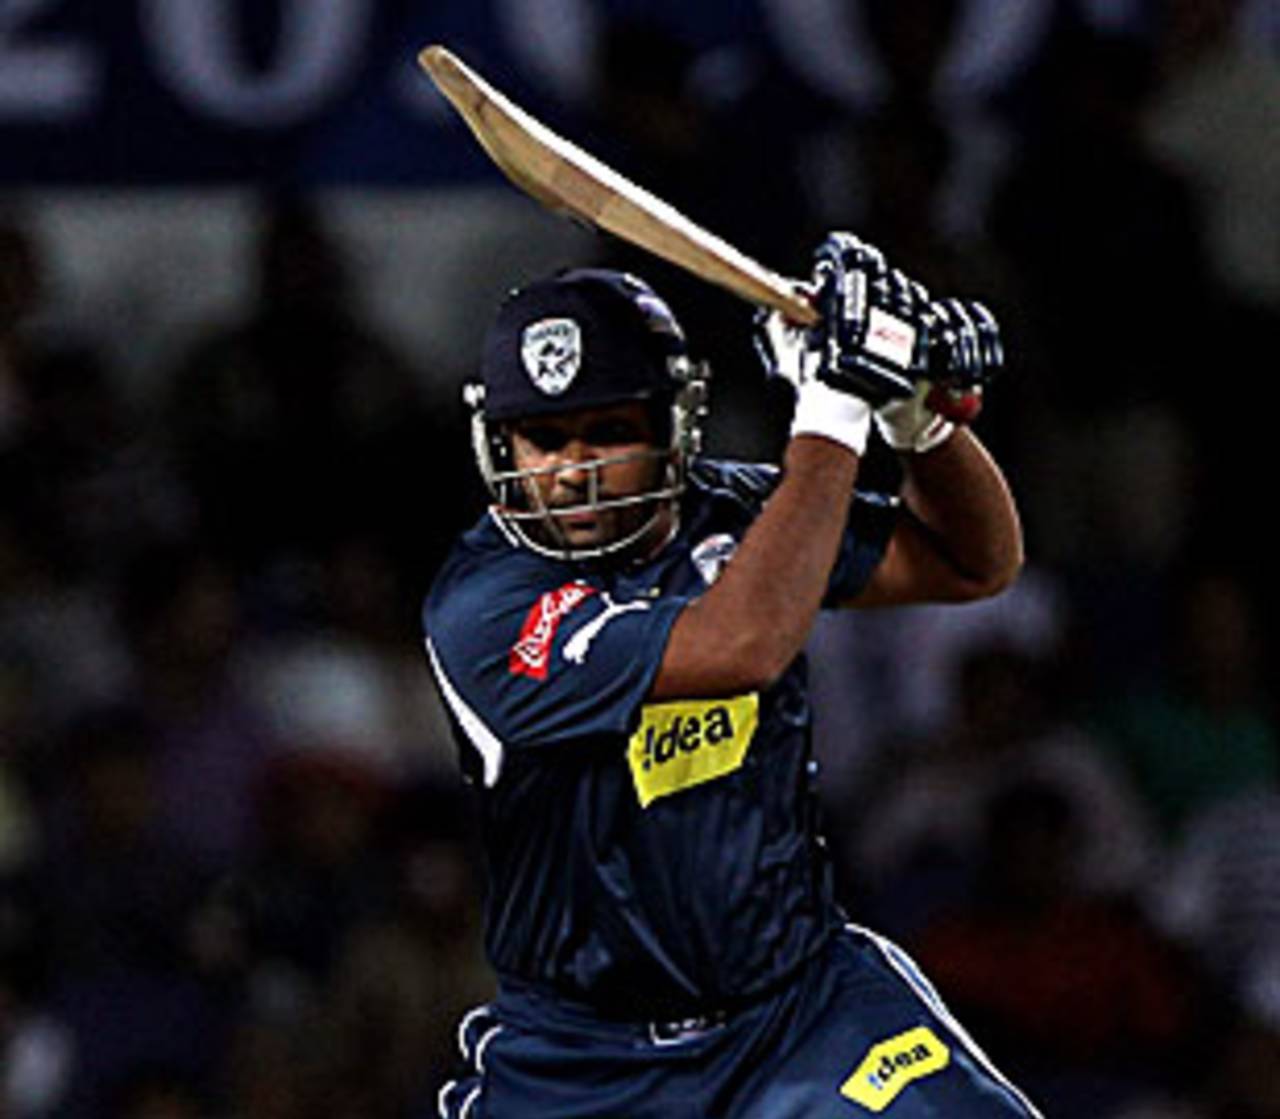 Rohit Sharma punches one through the off side, Deccan Chargers v Rajasthan Royals, IPL 2010, Nagpur, April 5, 2010